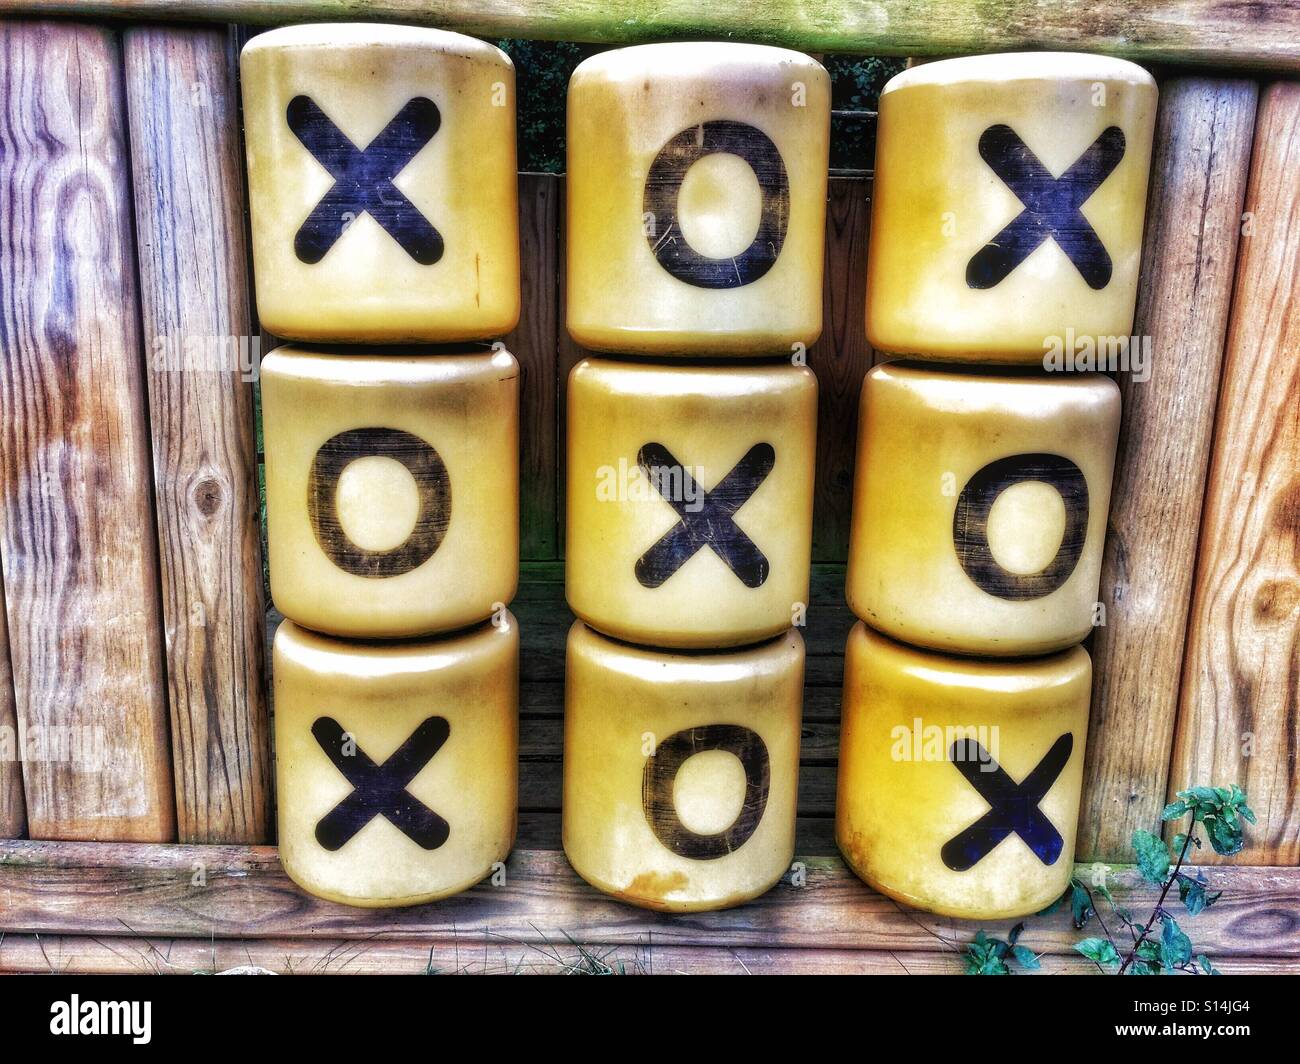 Giant outdoor noughts and crosses game. Stock Photo